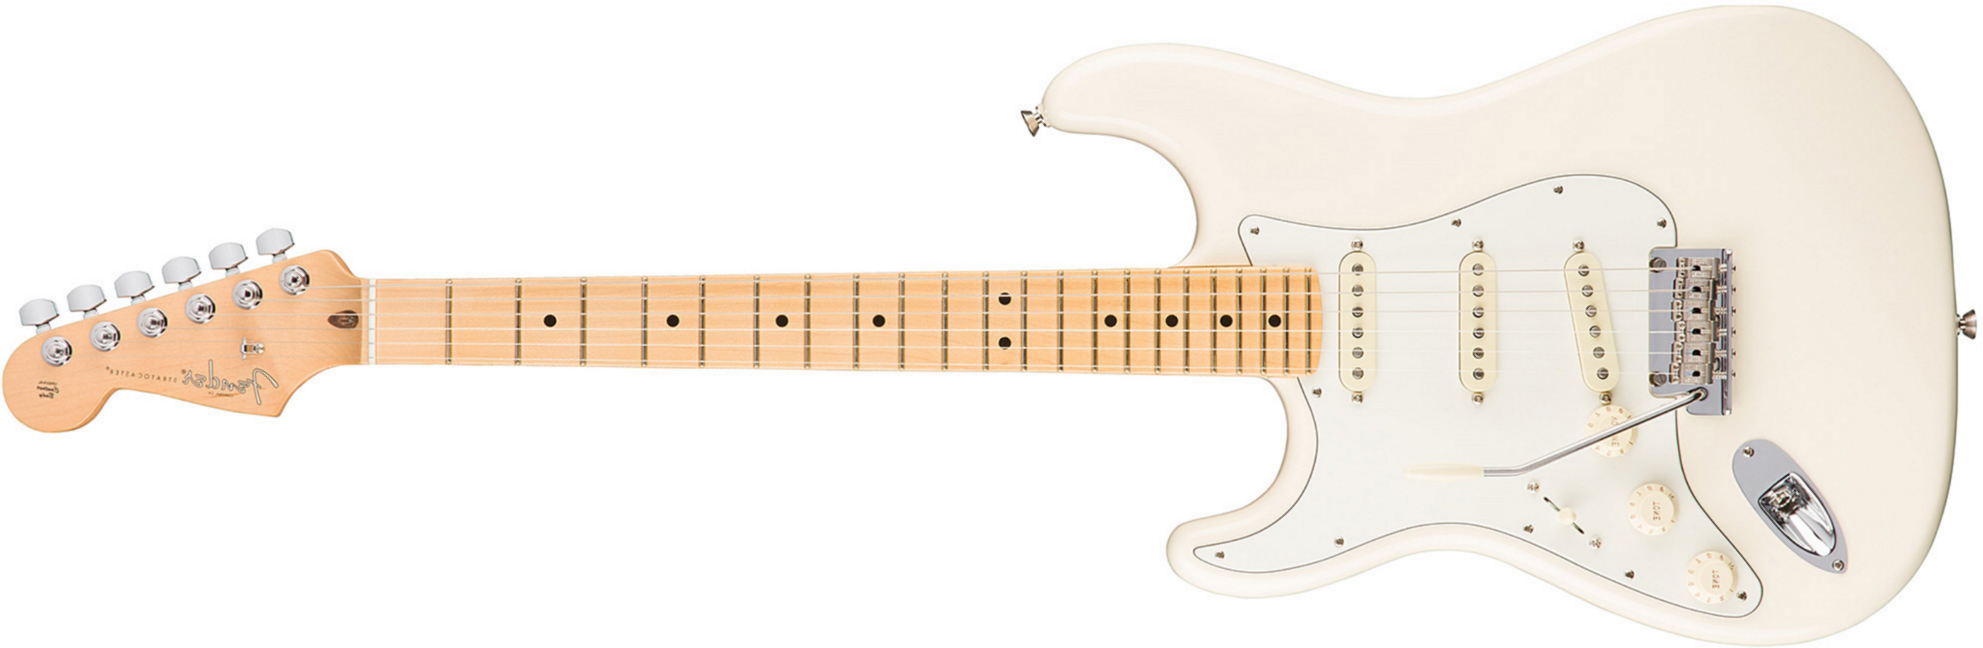 Fender Strat American Professional Lh Usa Gaucher 3s Mn - Olympic White - Left-handed electric guitar - Main picture